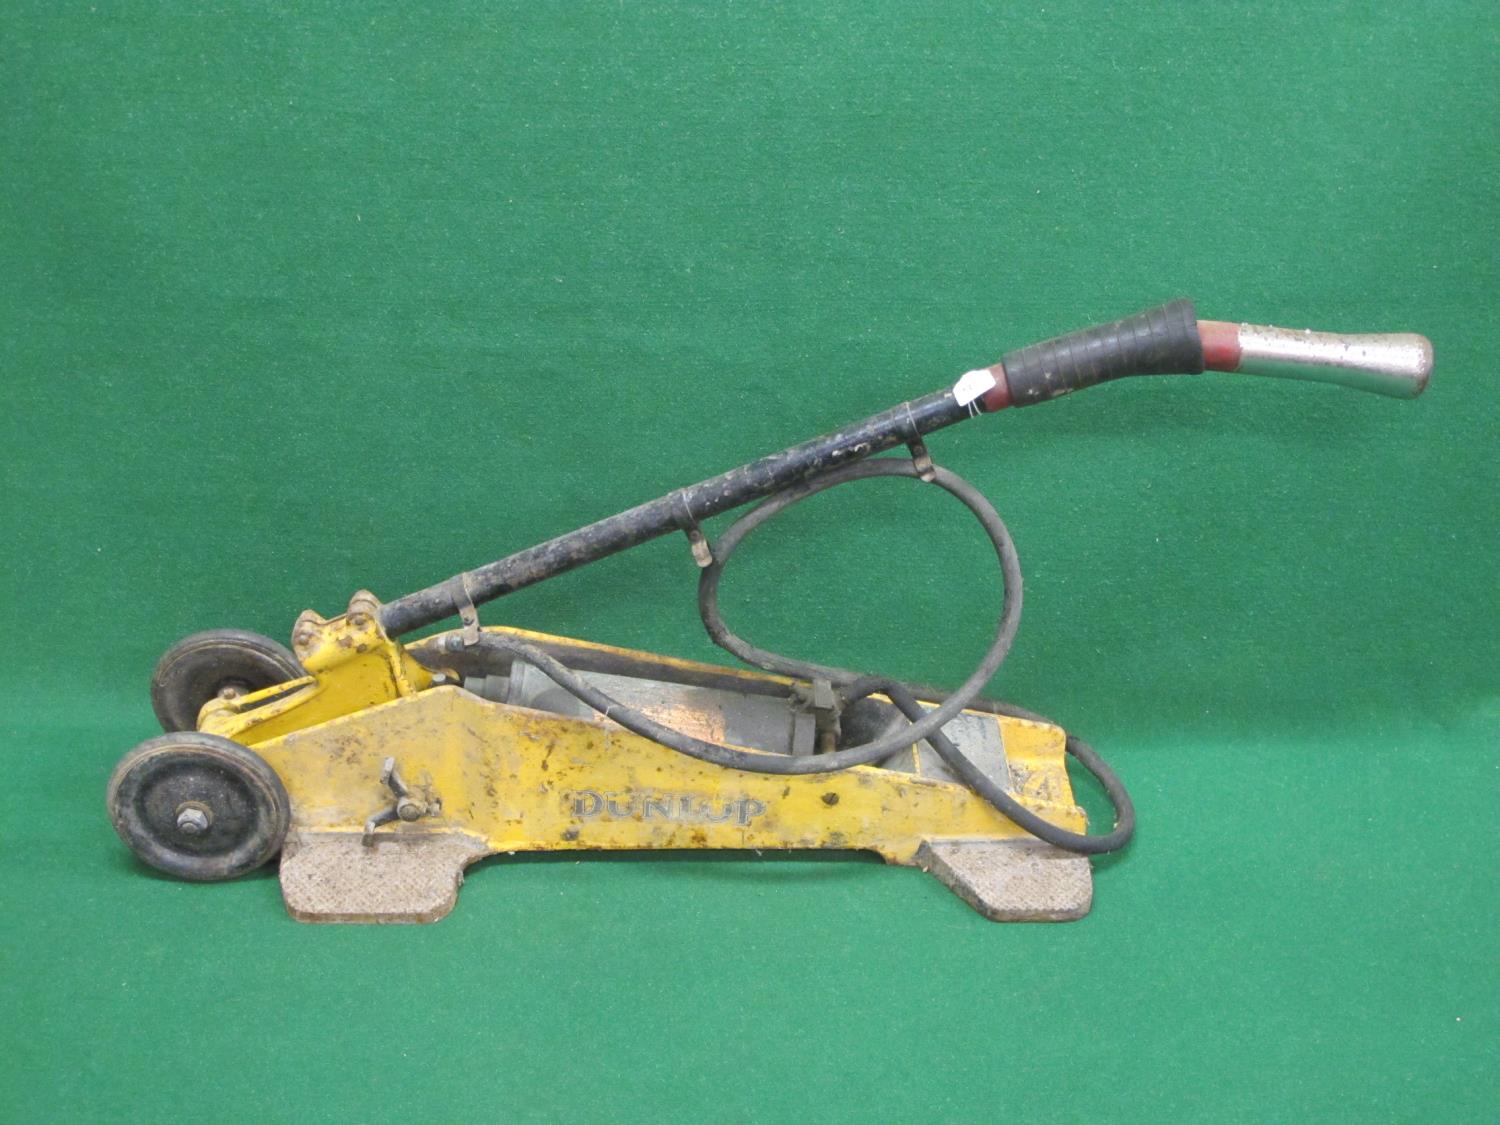 Dunlop Trolley Compressor - 33" long Please note descriptions are not condition reports, please